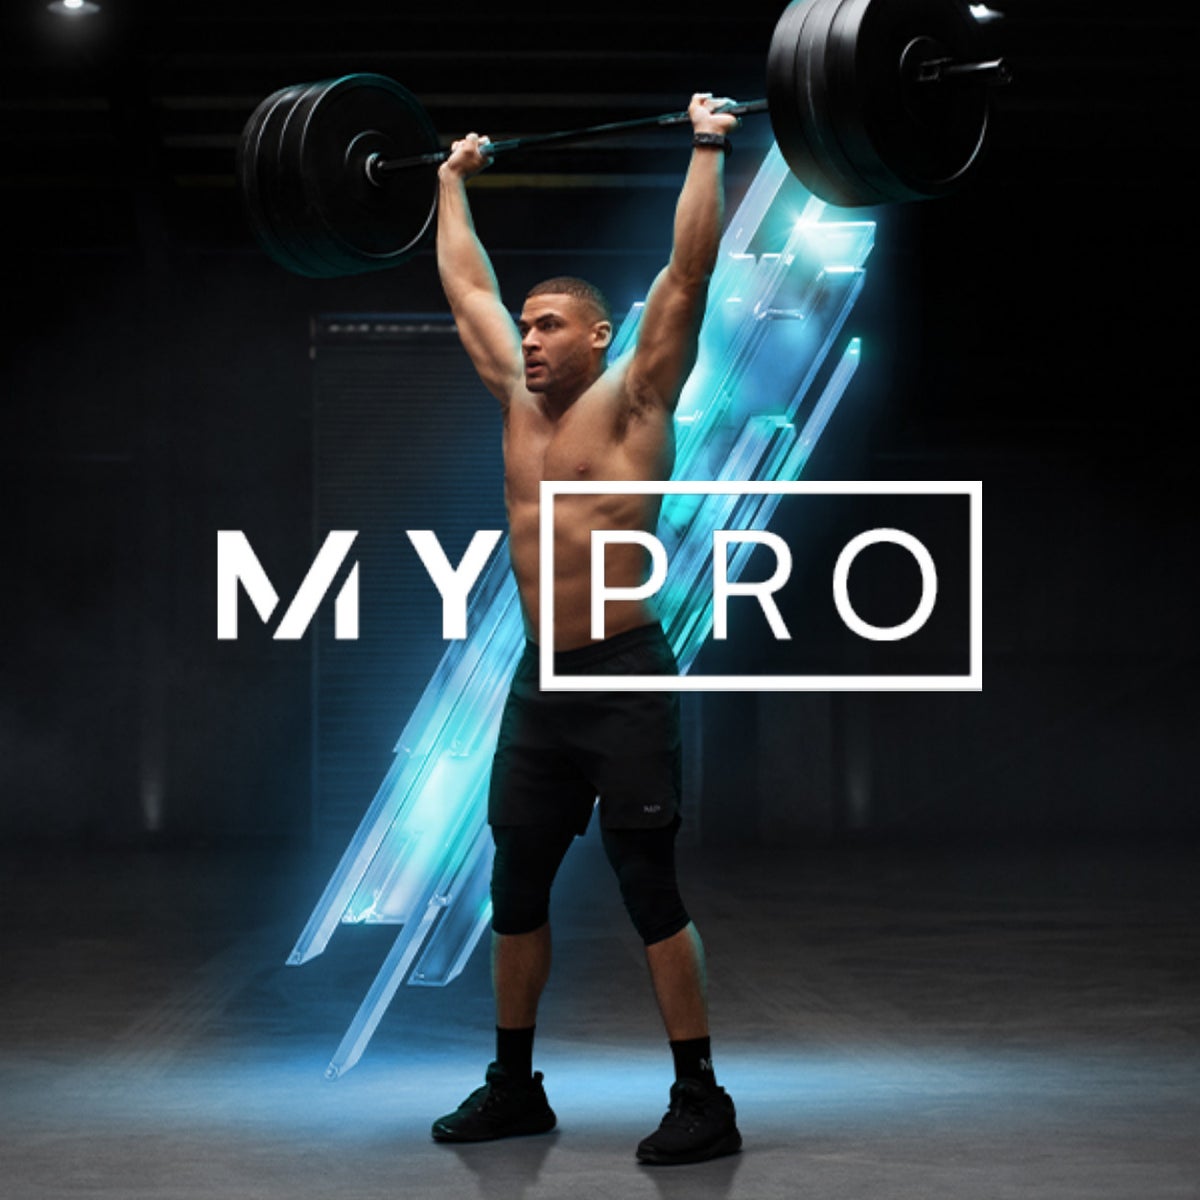 About us MyPro